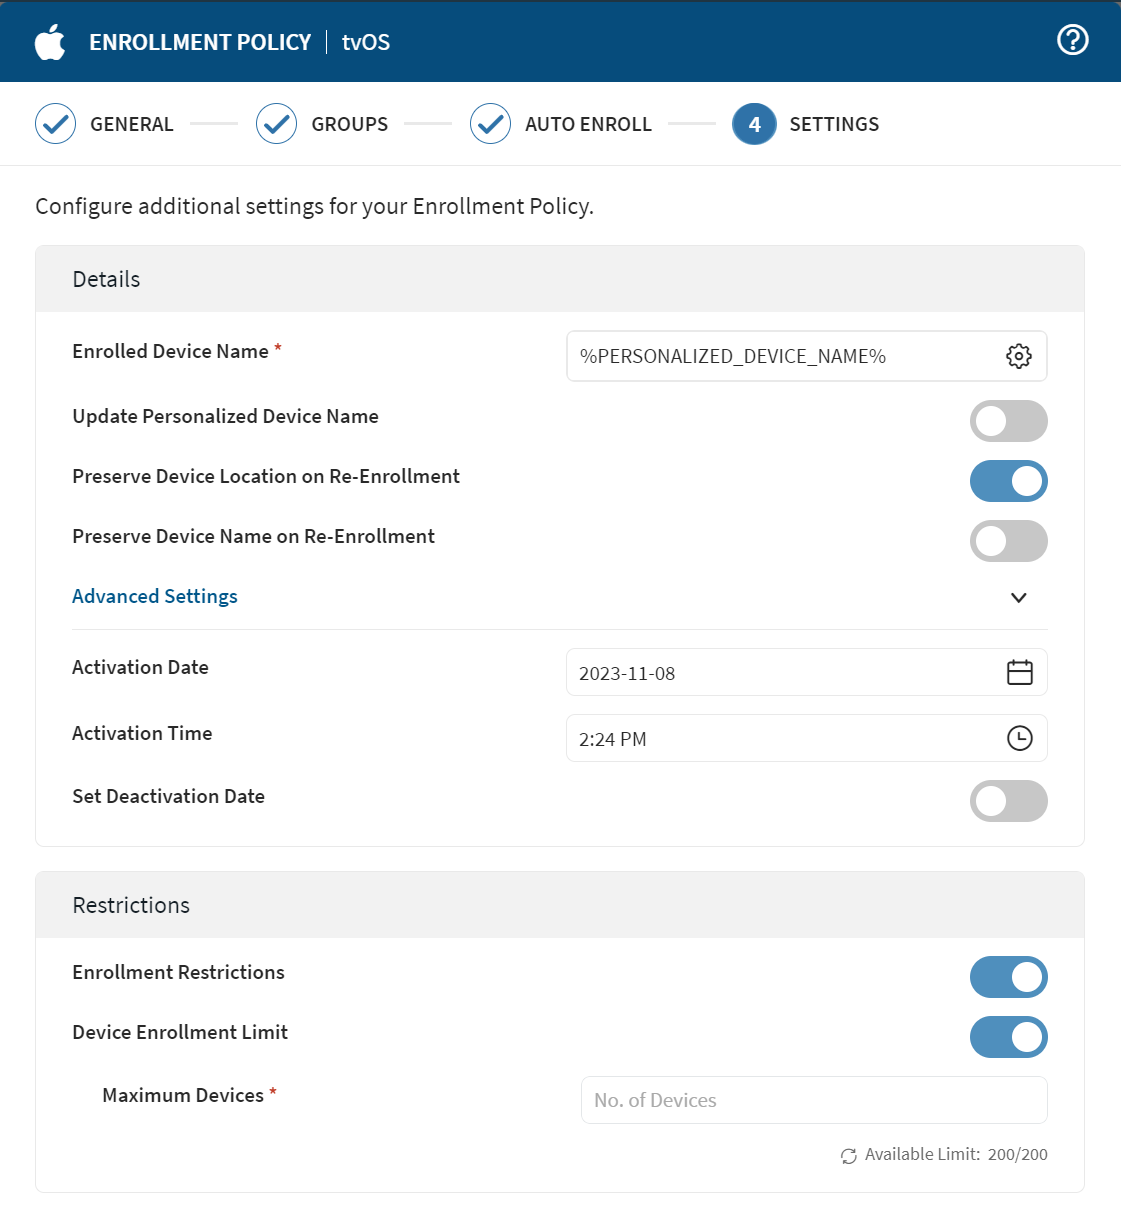 Enrollment policy Settings view